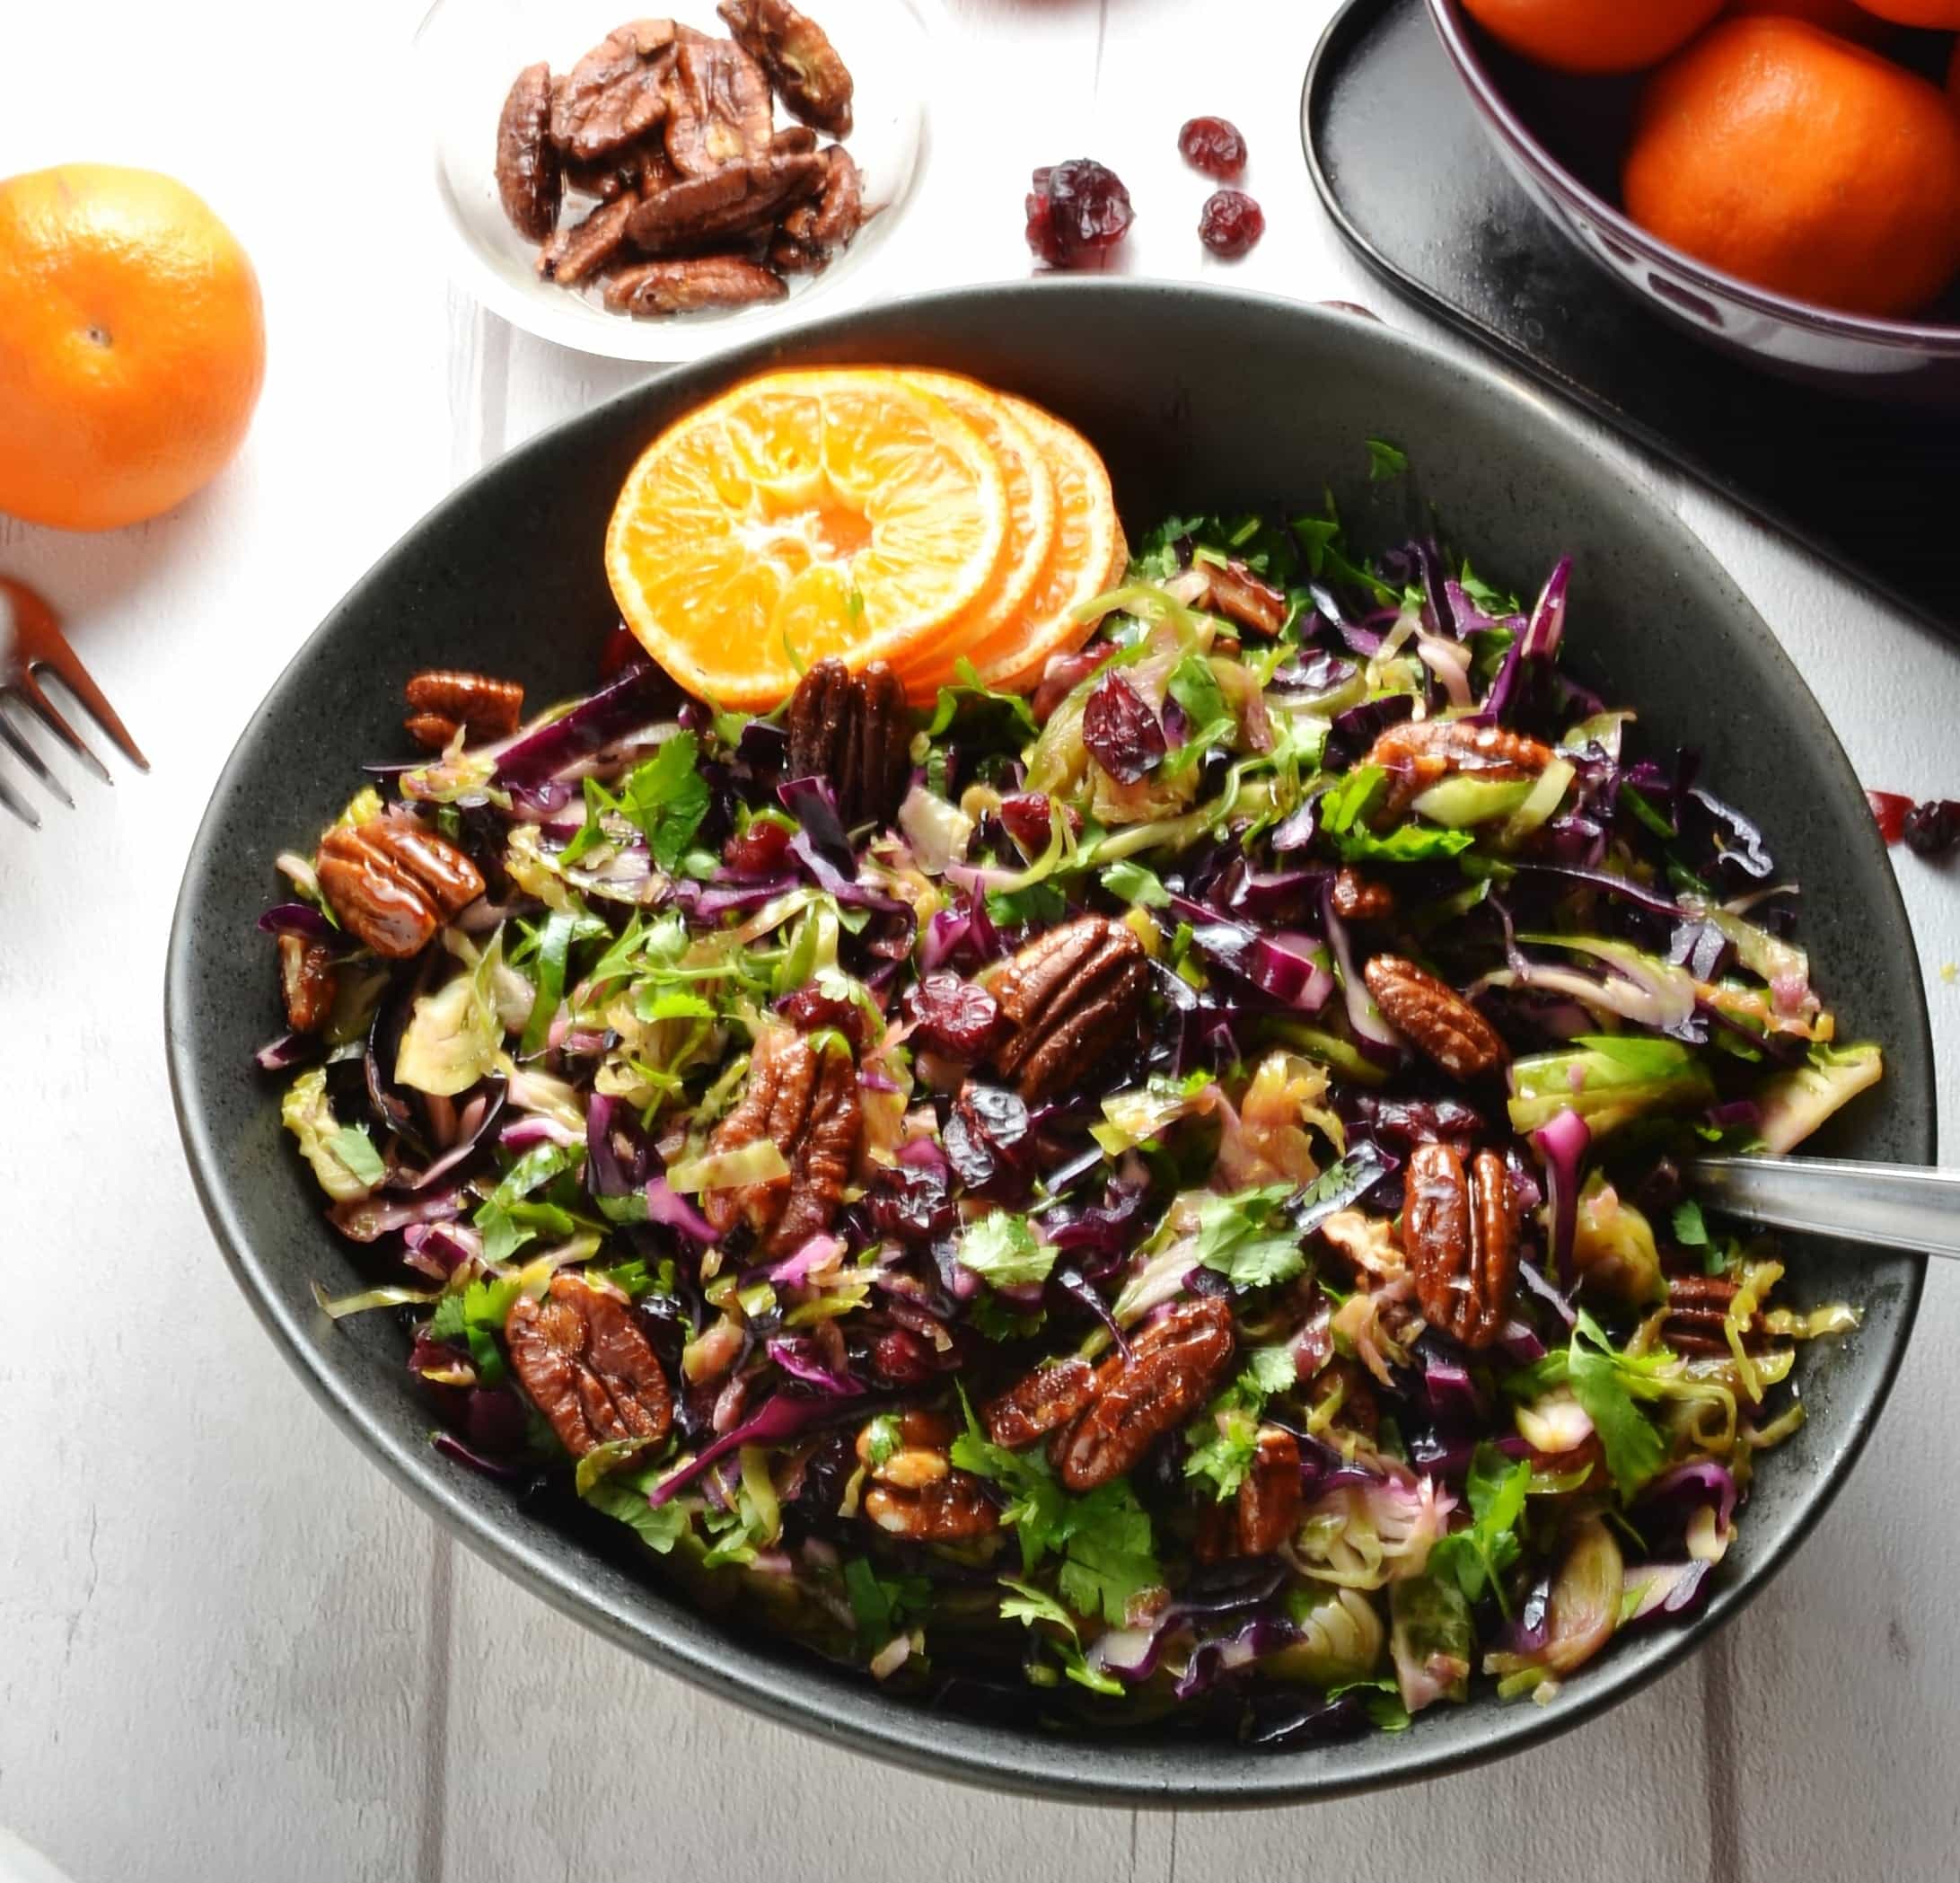 Top down view of Christmas slaw in black bowl with pecans and clementine in background.